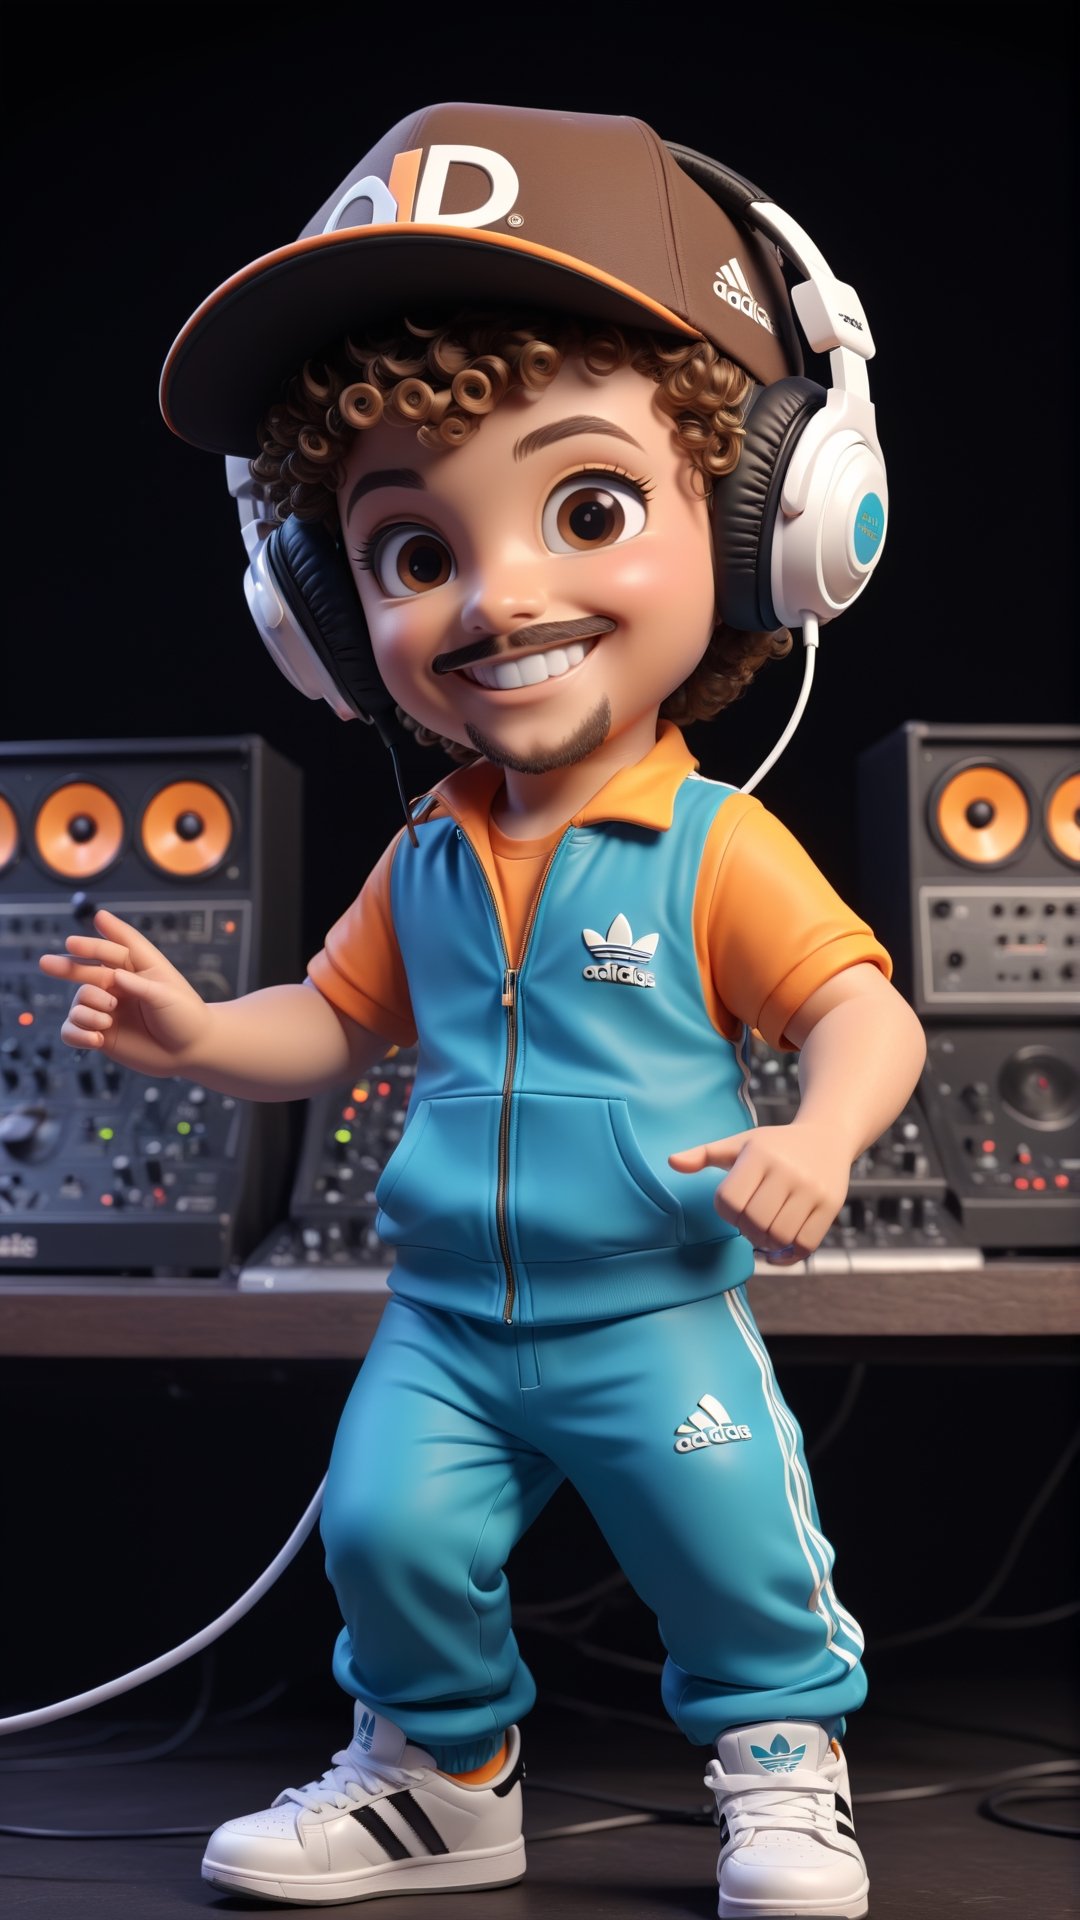 (((Dewey Decibel text logo))),  dancing and DJing, 3d figure,  1 boy,  brown curly hair, light brown/hazel eyes, piercings,((backwards hat)), adidas jump suit outfit,  cute smile,  famous DJ,  very popular,  passionate, bad ass, dressed retro/furutistic,  Electronic music, (((short goatee))), ((headphones wrapped around neck)), looking retro and new wave,  DJing for a huge crowd,  everyone is looking at him,3d figure,text logo,pturbo